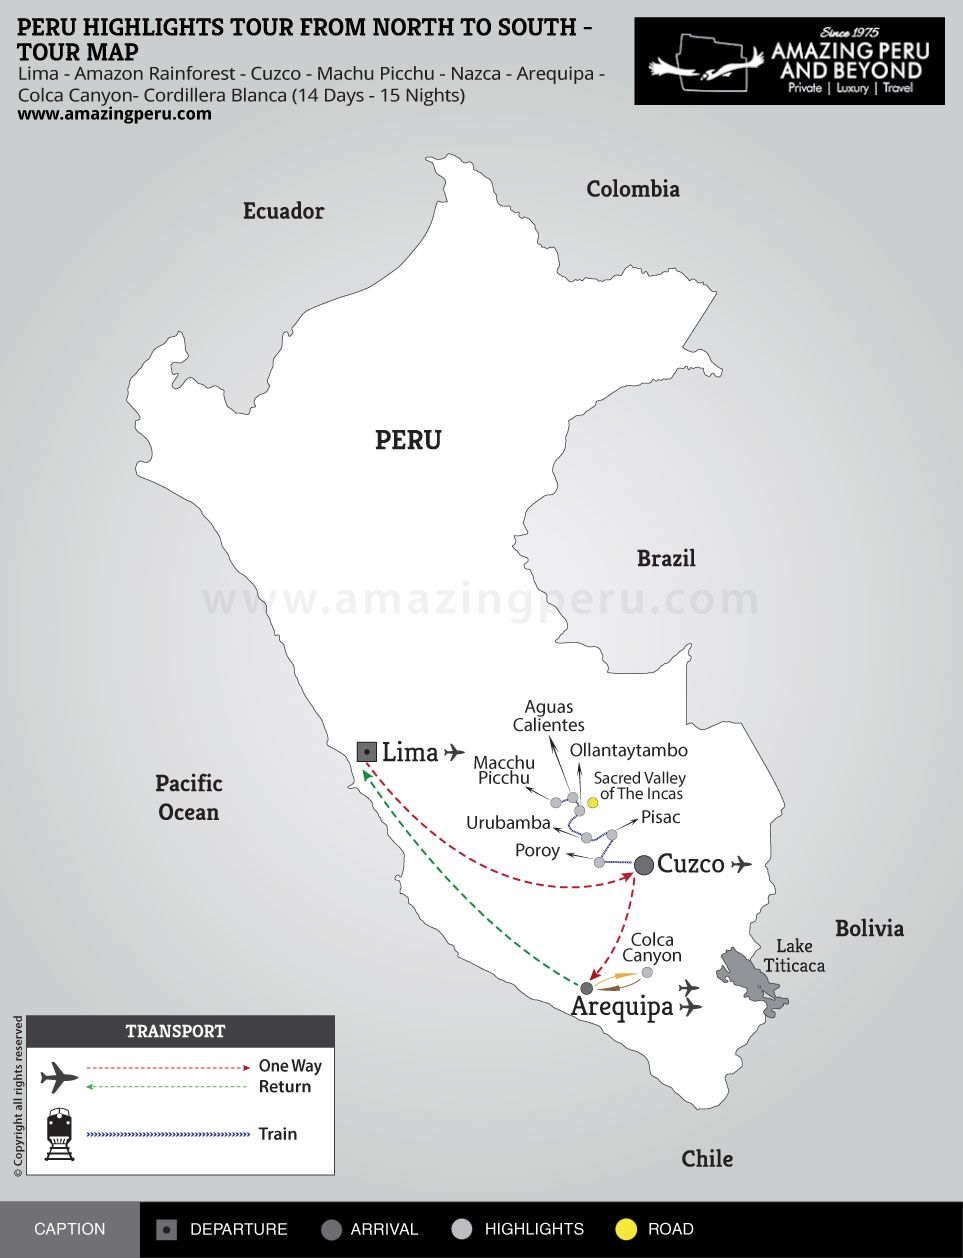 Peru Highlights Tour from North to South - 21 days / 20 nights.